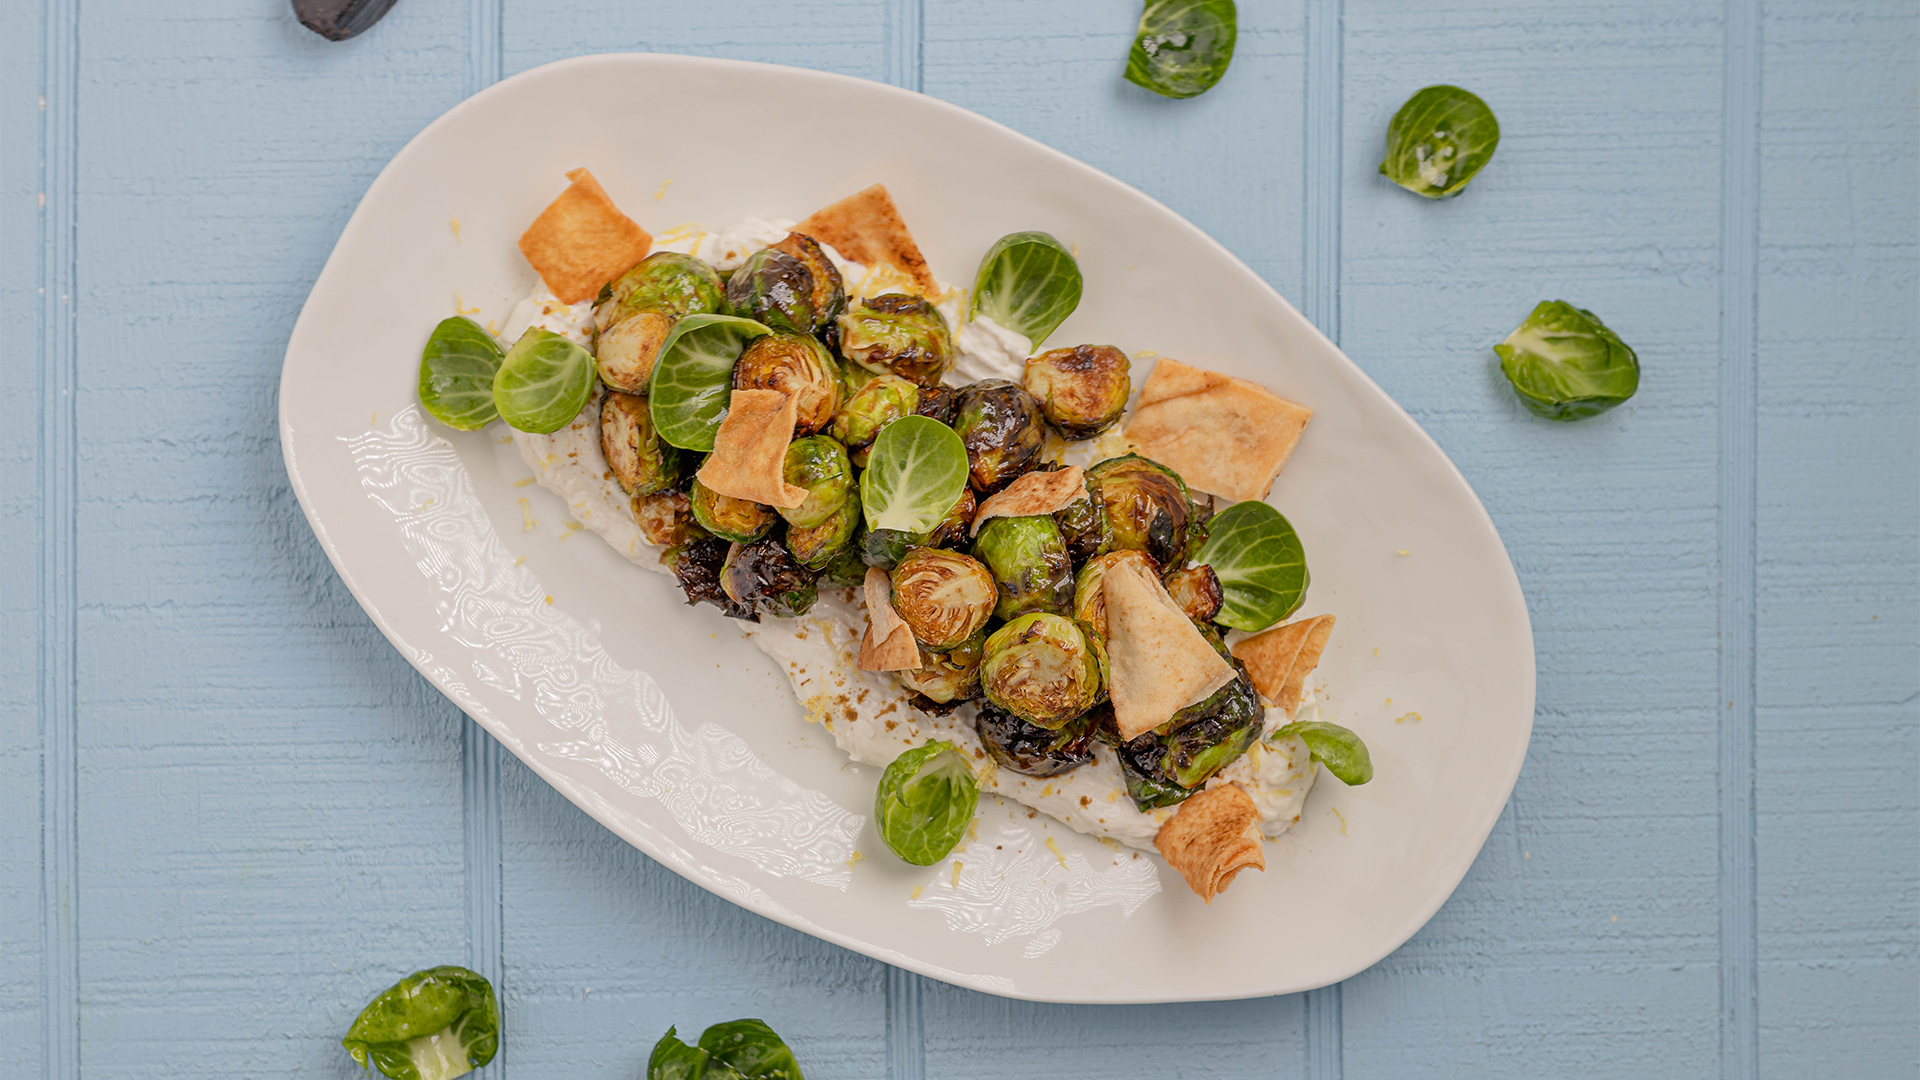 Brussels sprouts with black garlic and labneh